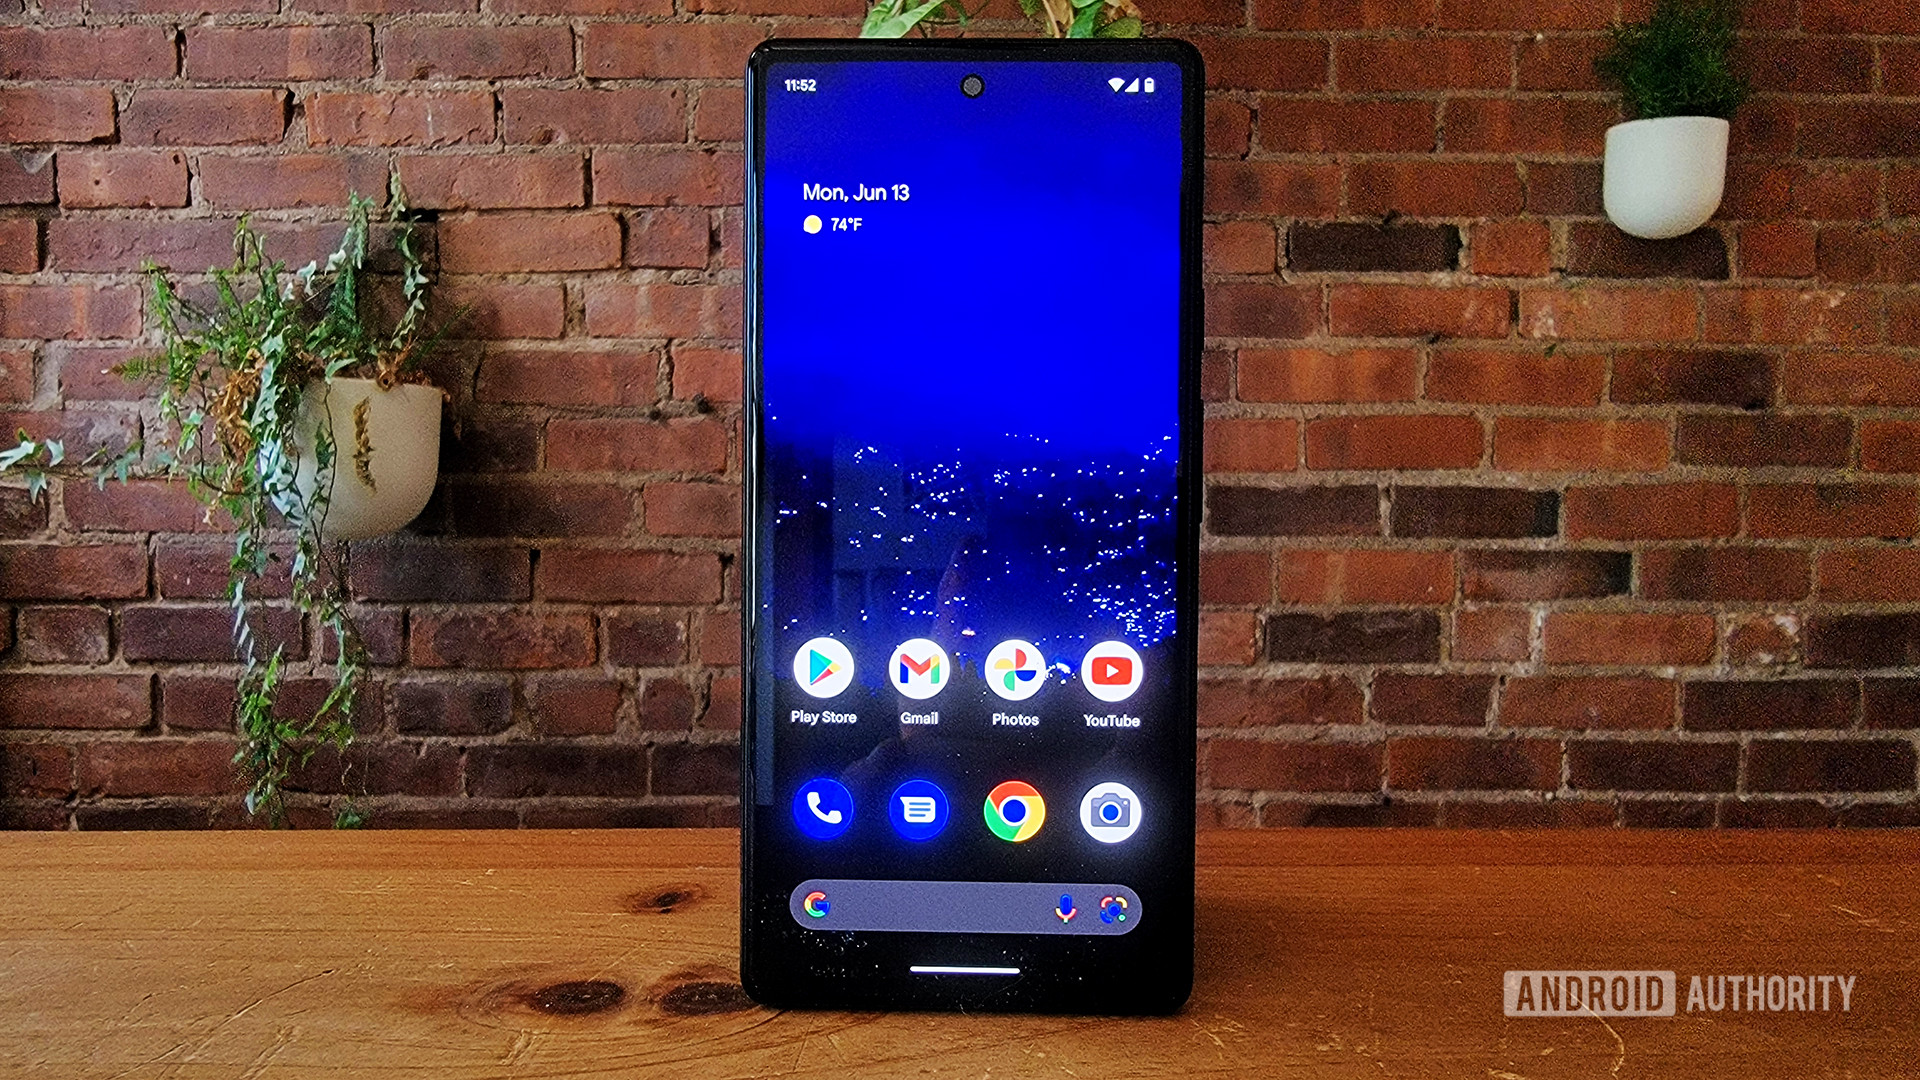 Wallpaper Wednesday: Android wallpapers 2022-06-15 - Android Authority